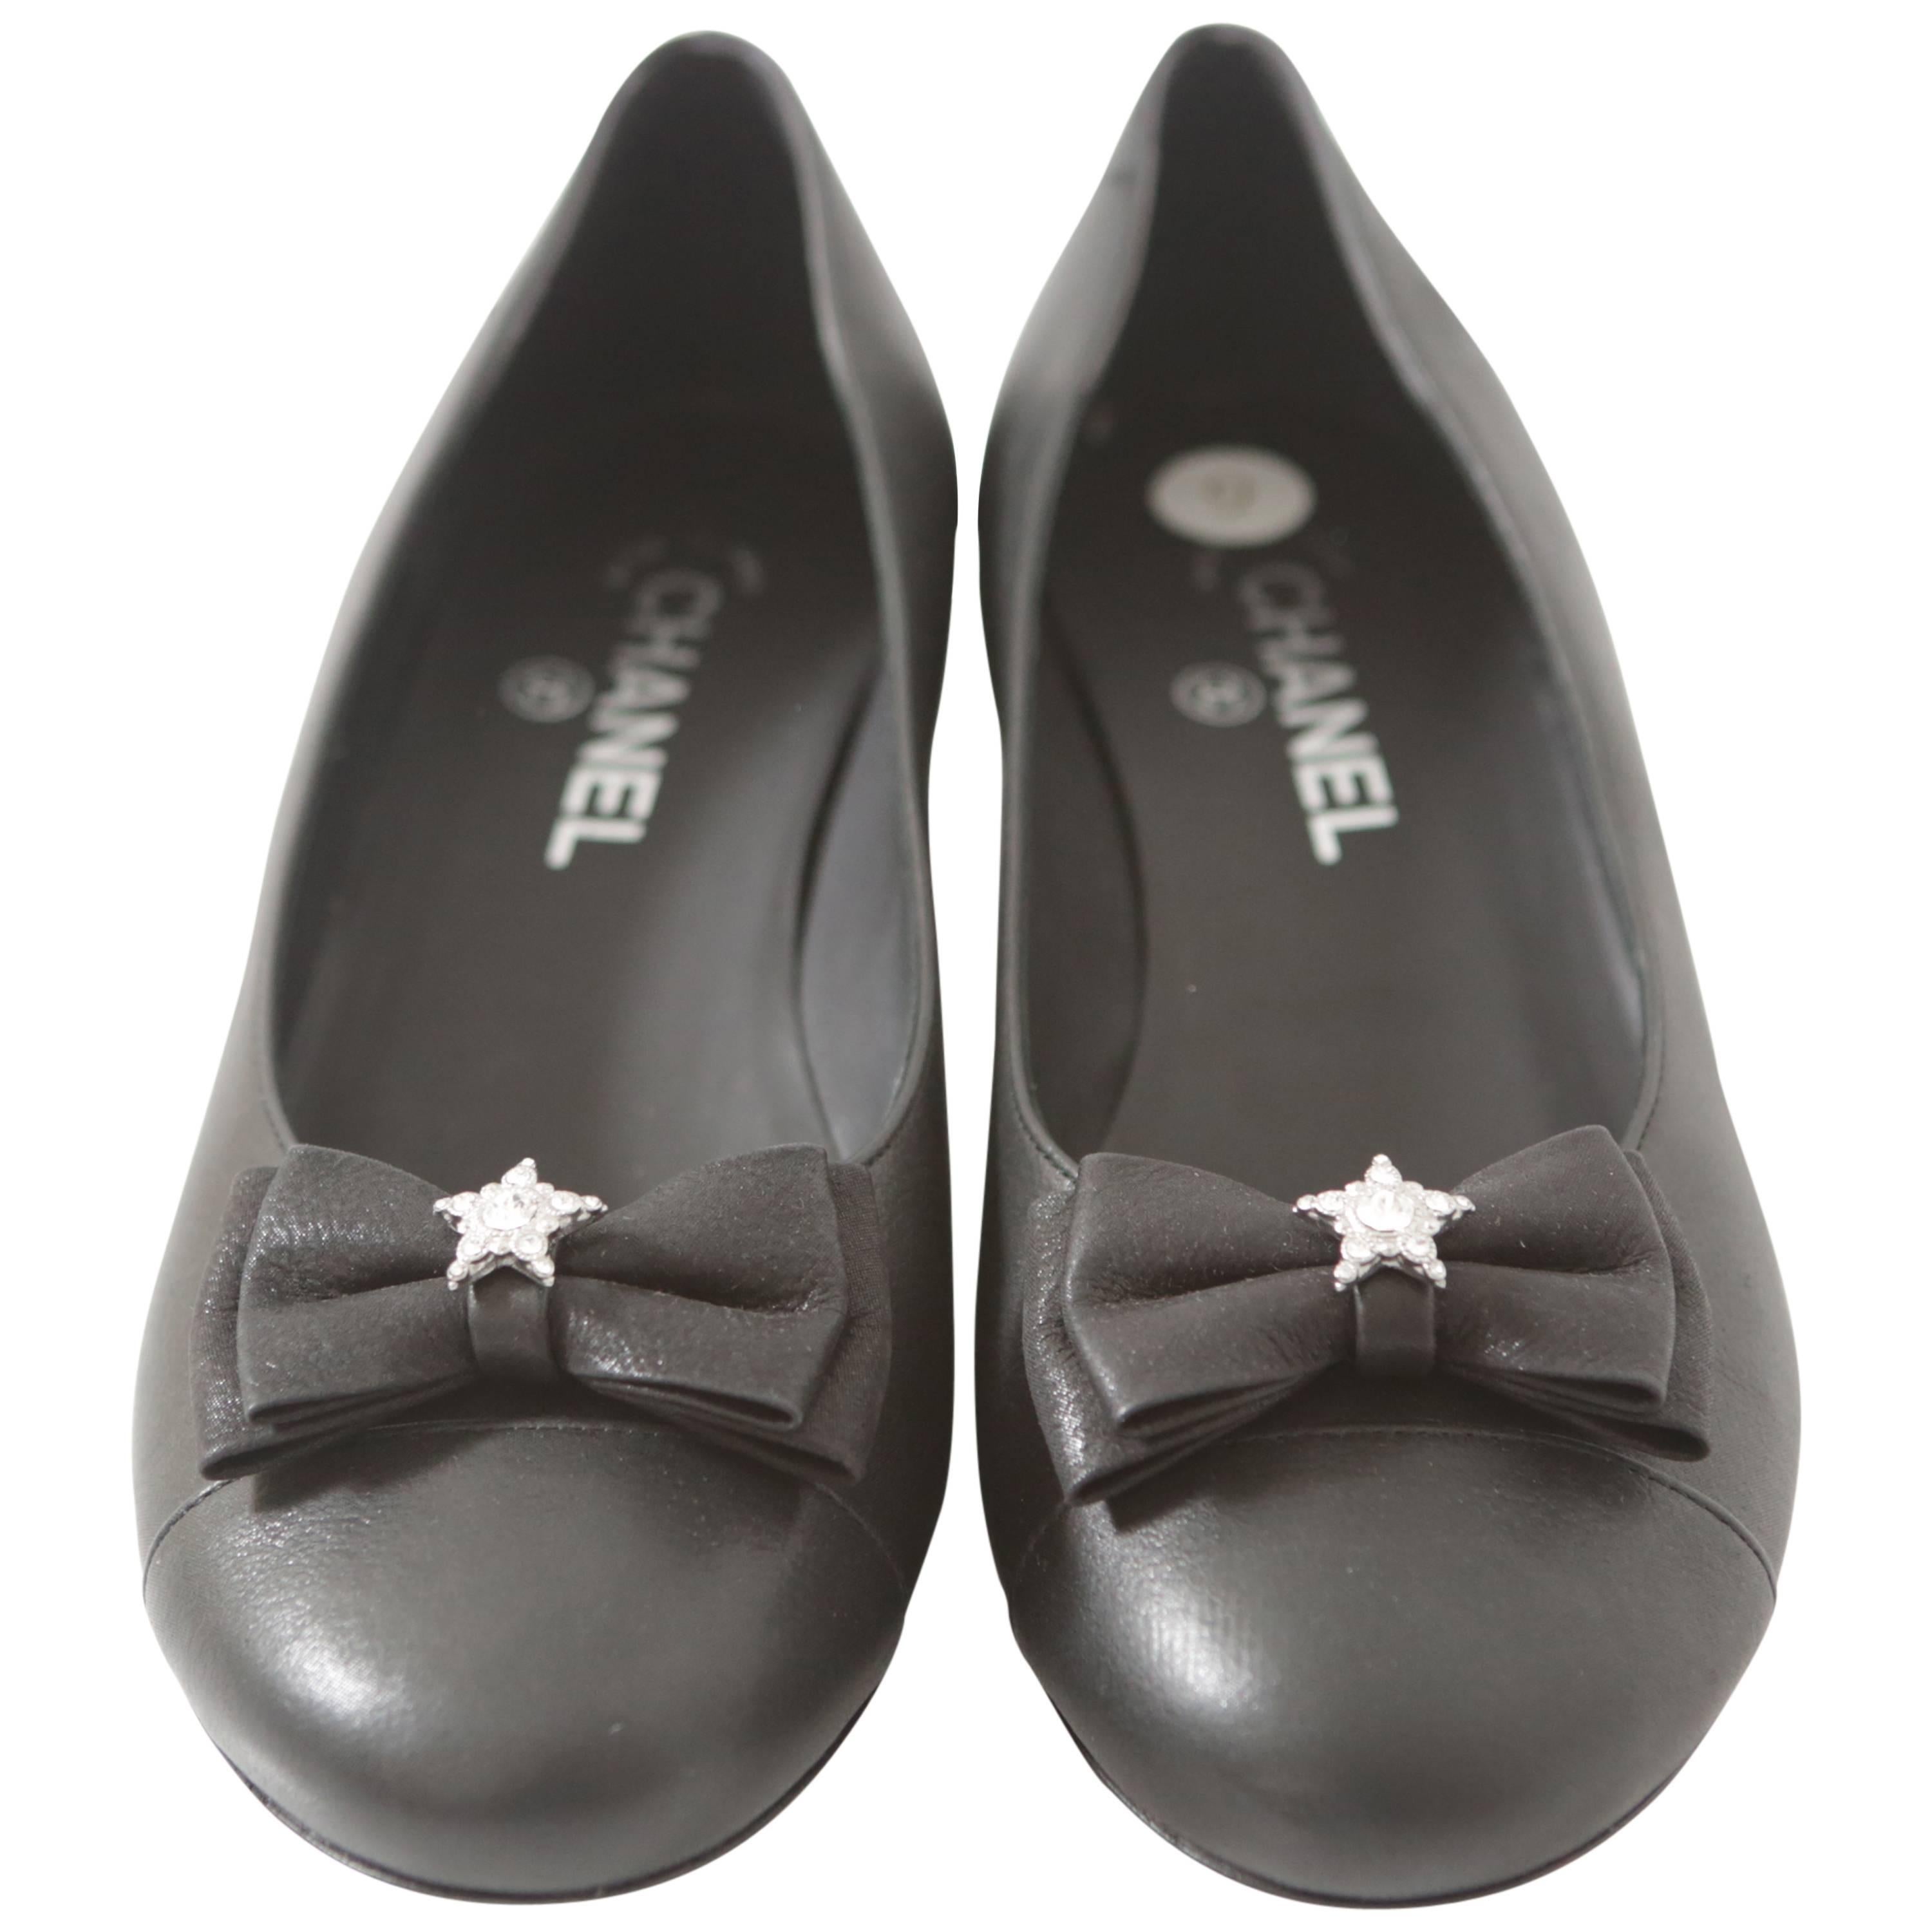 Chanel Black Leather Ballerina Flats with Grosgrain Bow & Crystal 